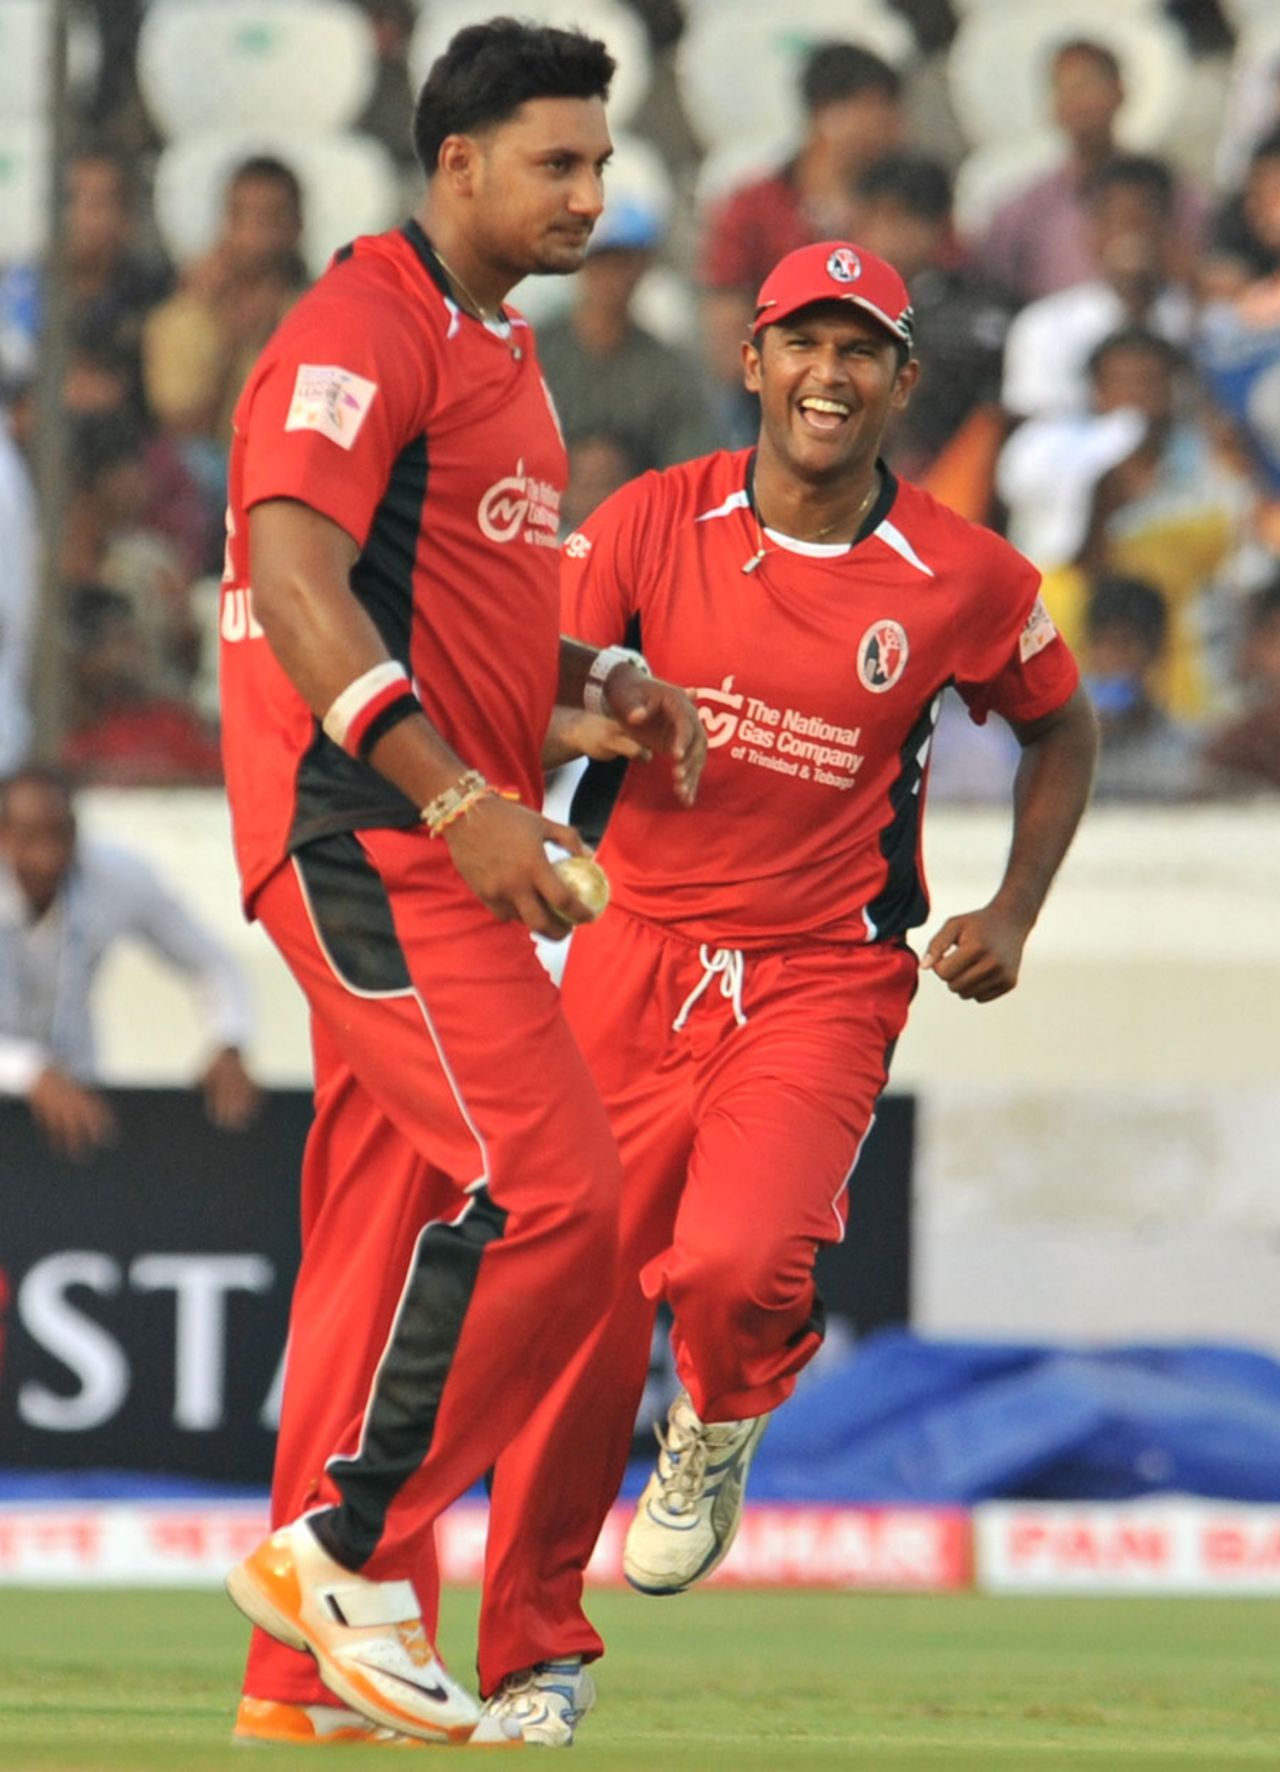 Ravi Rampaul finished with 2 for 17 and contributed to two run-outs, Ruhuna v T&T, CLT20 qualifier, Hyderabad, September 19, 2011